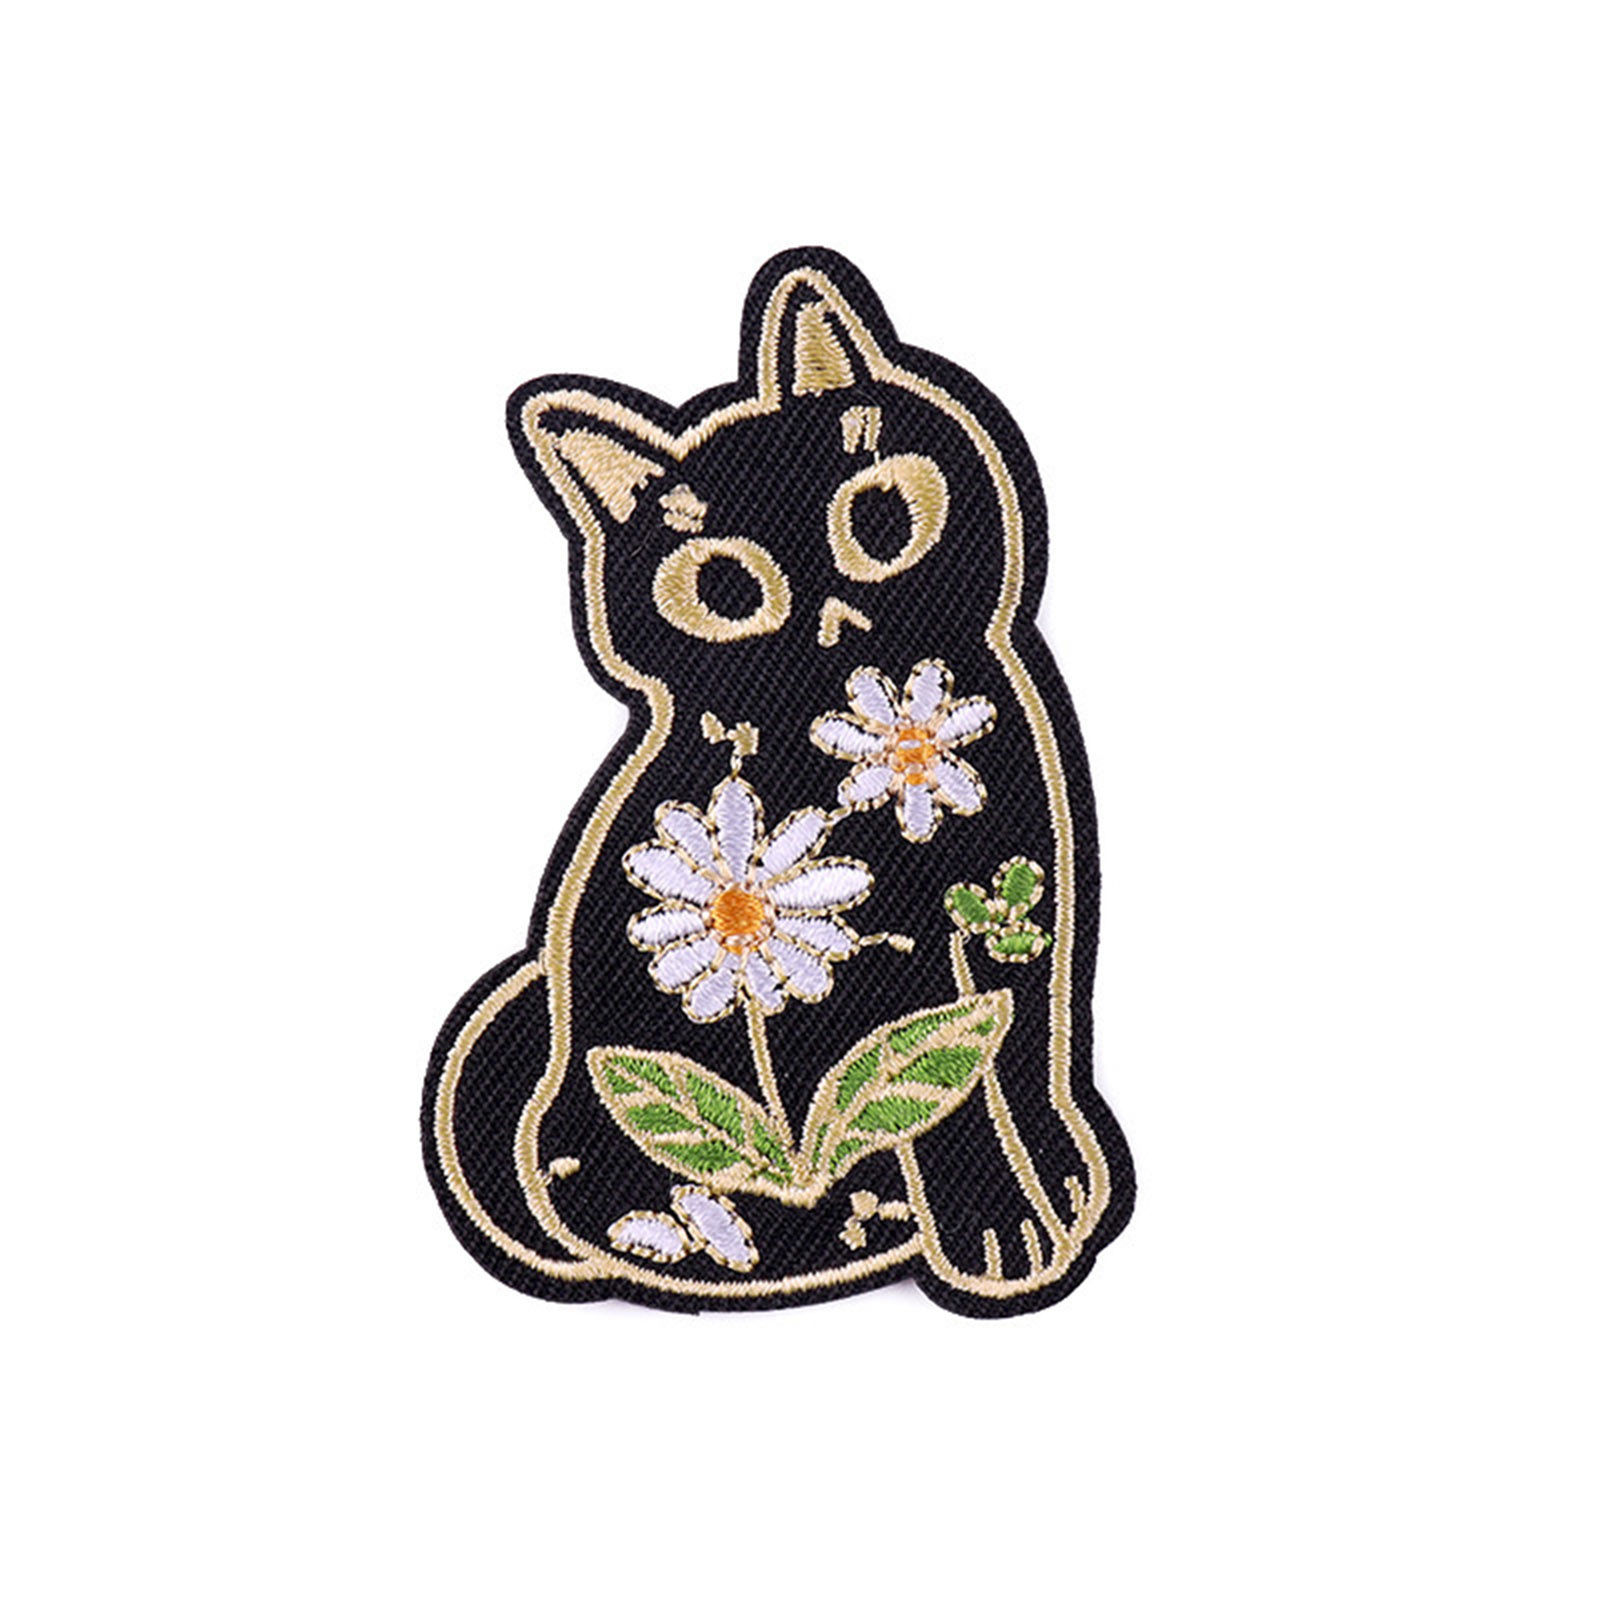 Picture of Fabric Iron On Patches Appliques (With Glue Back) Craft Black Cat 6.5cm x 4.4cm, 5 PCs